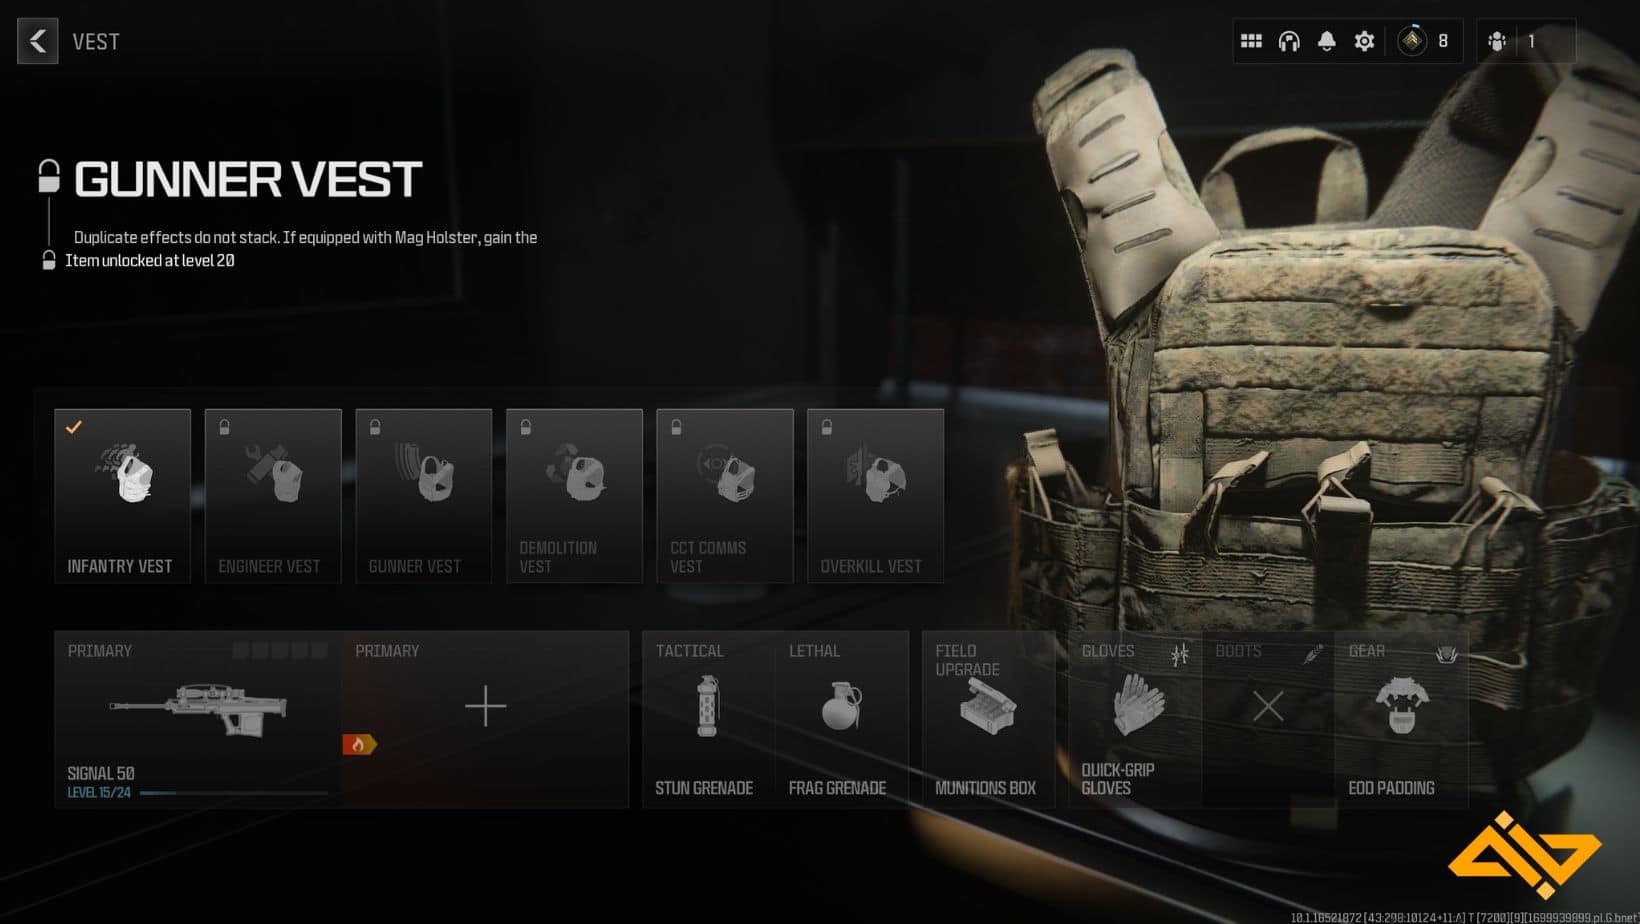 The Gunner Vest allows you to carry two primary weapons.